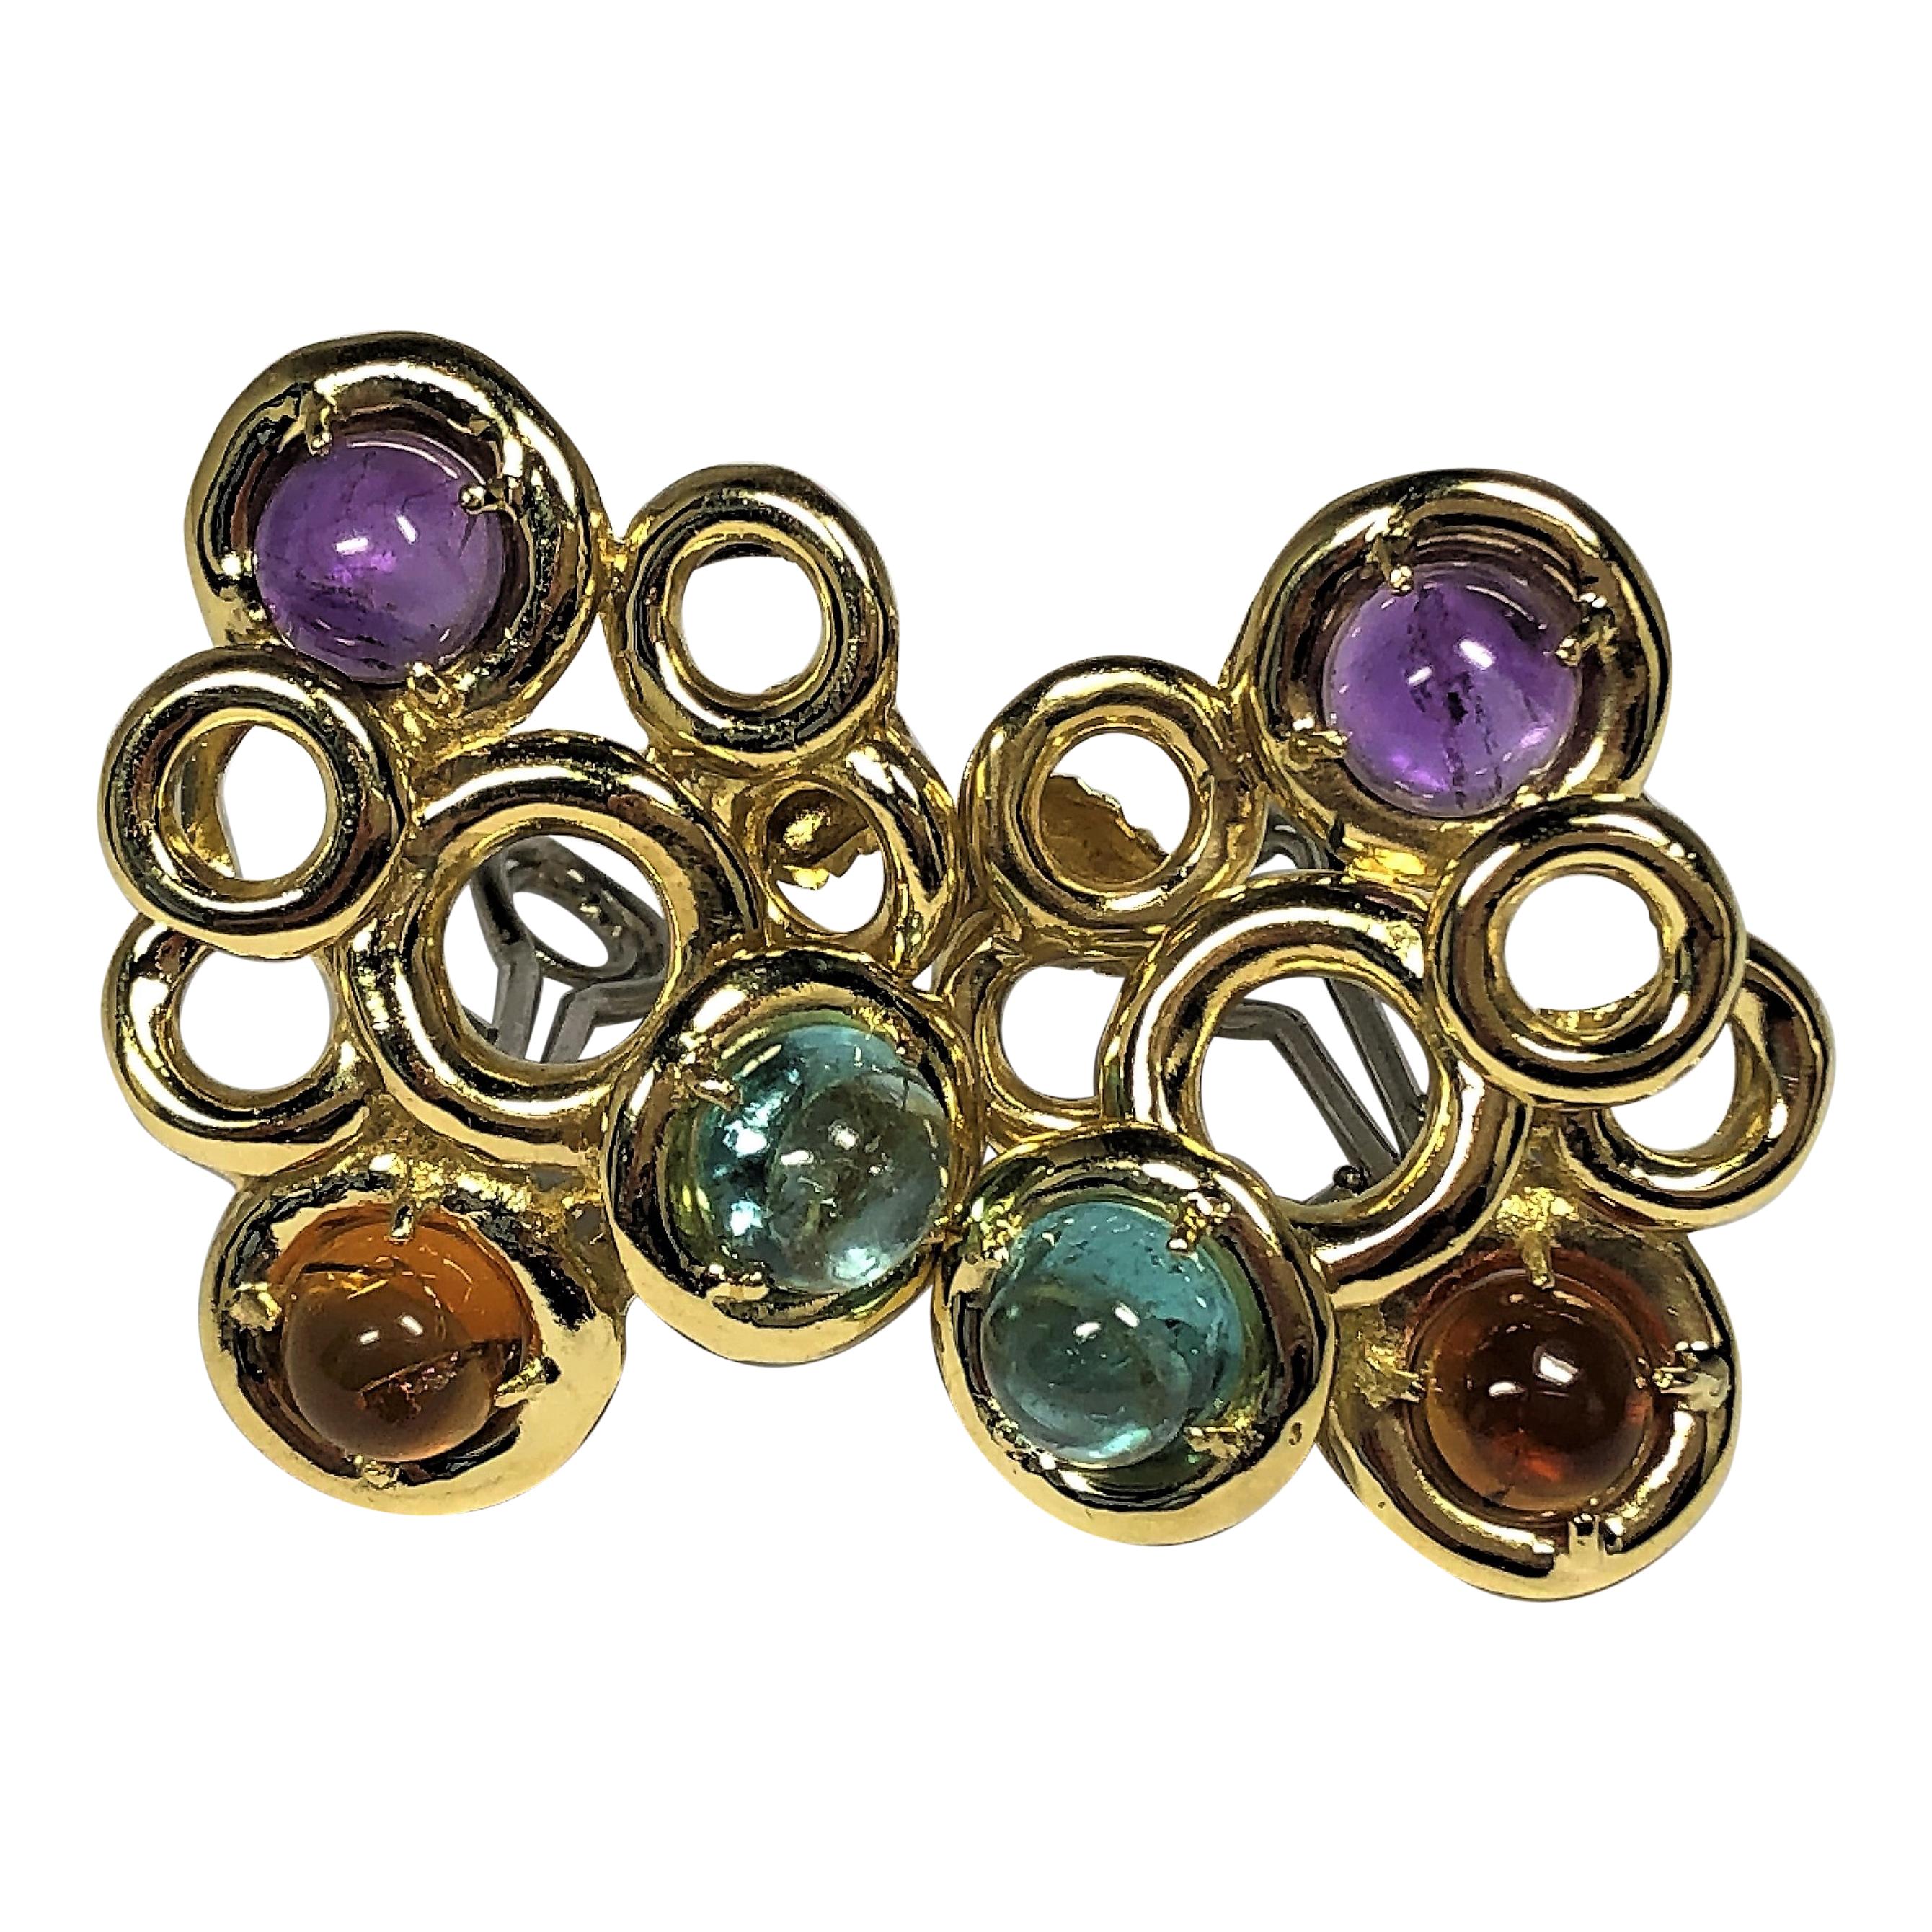 1960s Clip-On Gold Earrings with Cabochon Aquamarine, Amethyst and Citrine